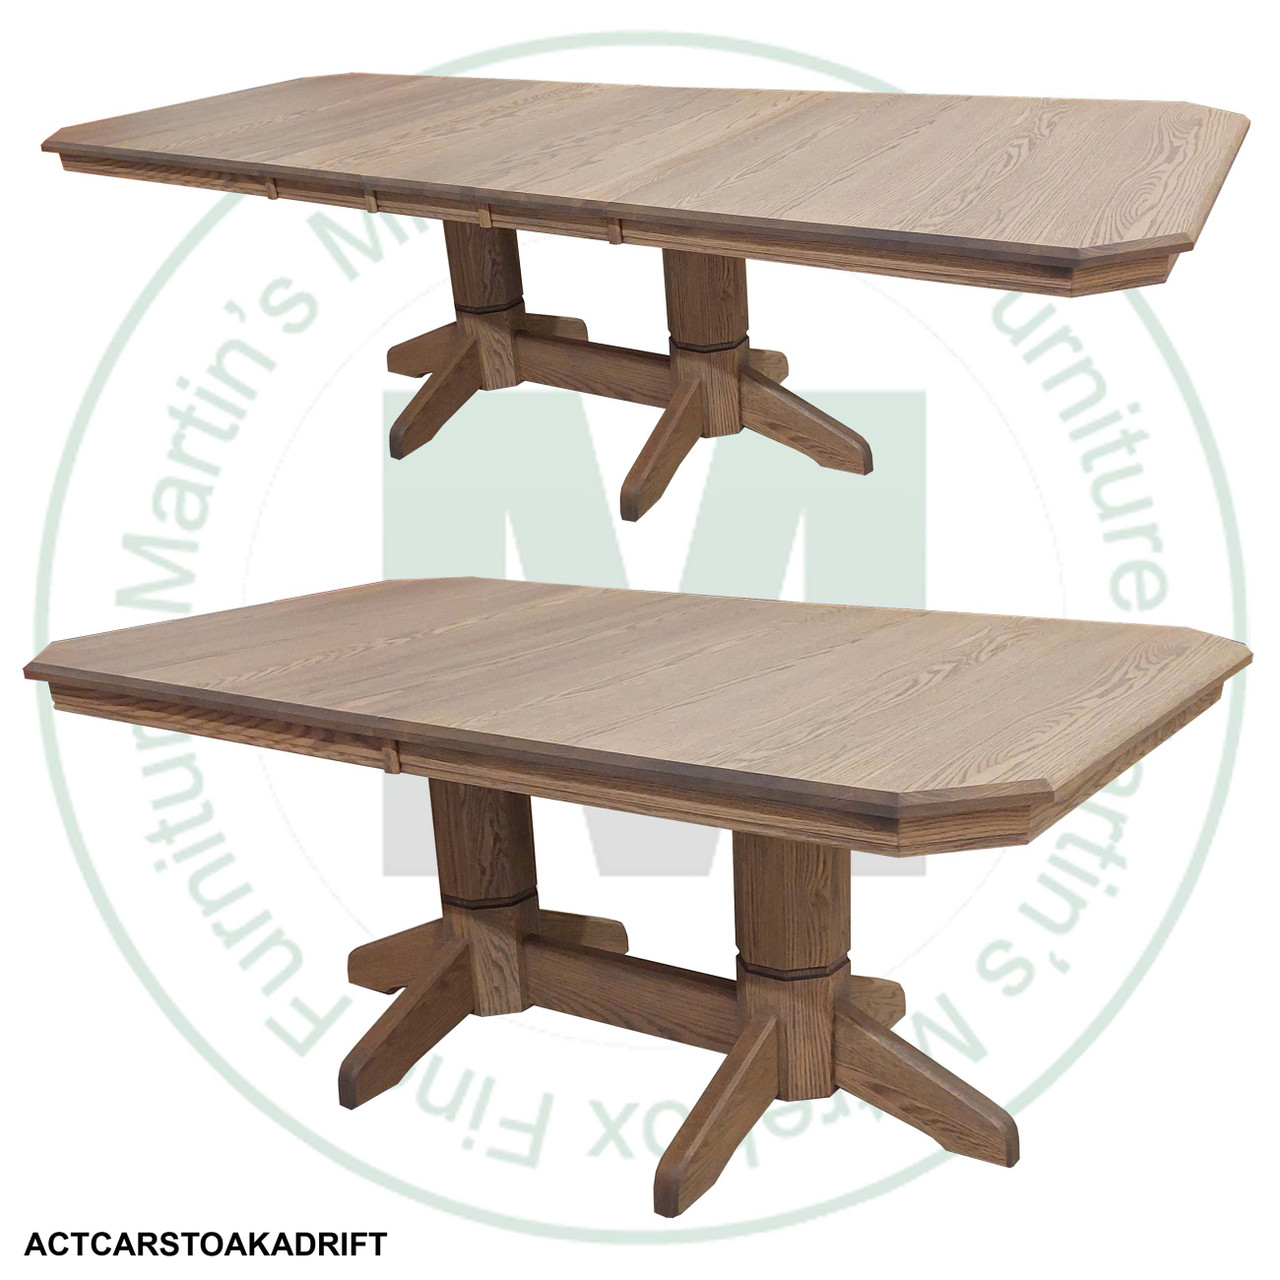 Maple Urban Classic Double Pedestal Table 42''D x 66''W x 30''H With 4 - 12'' Leaves